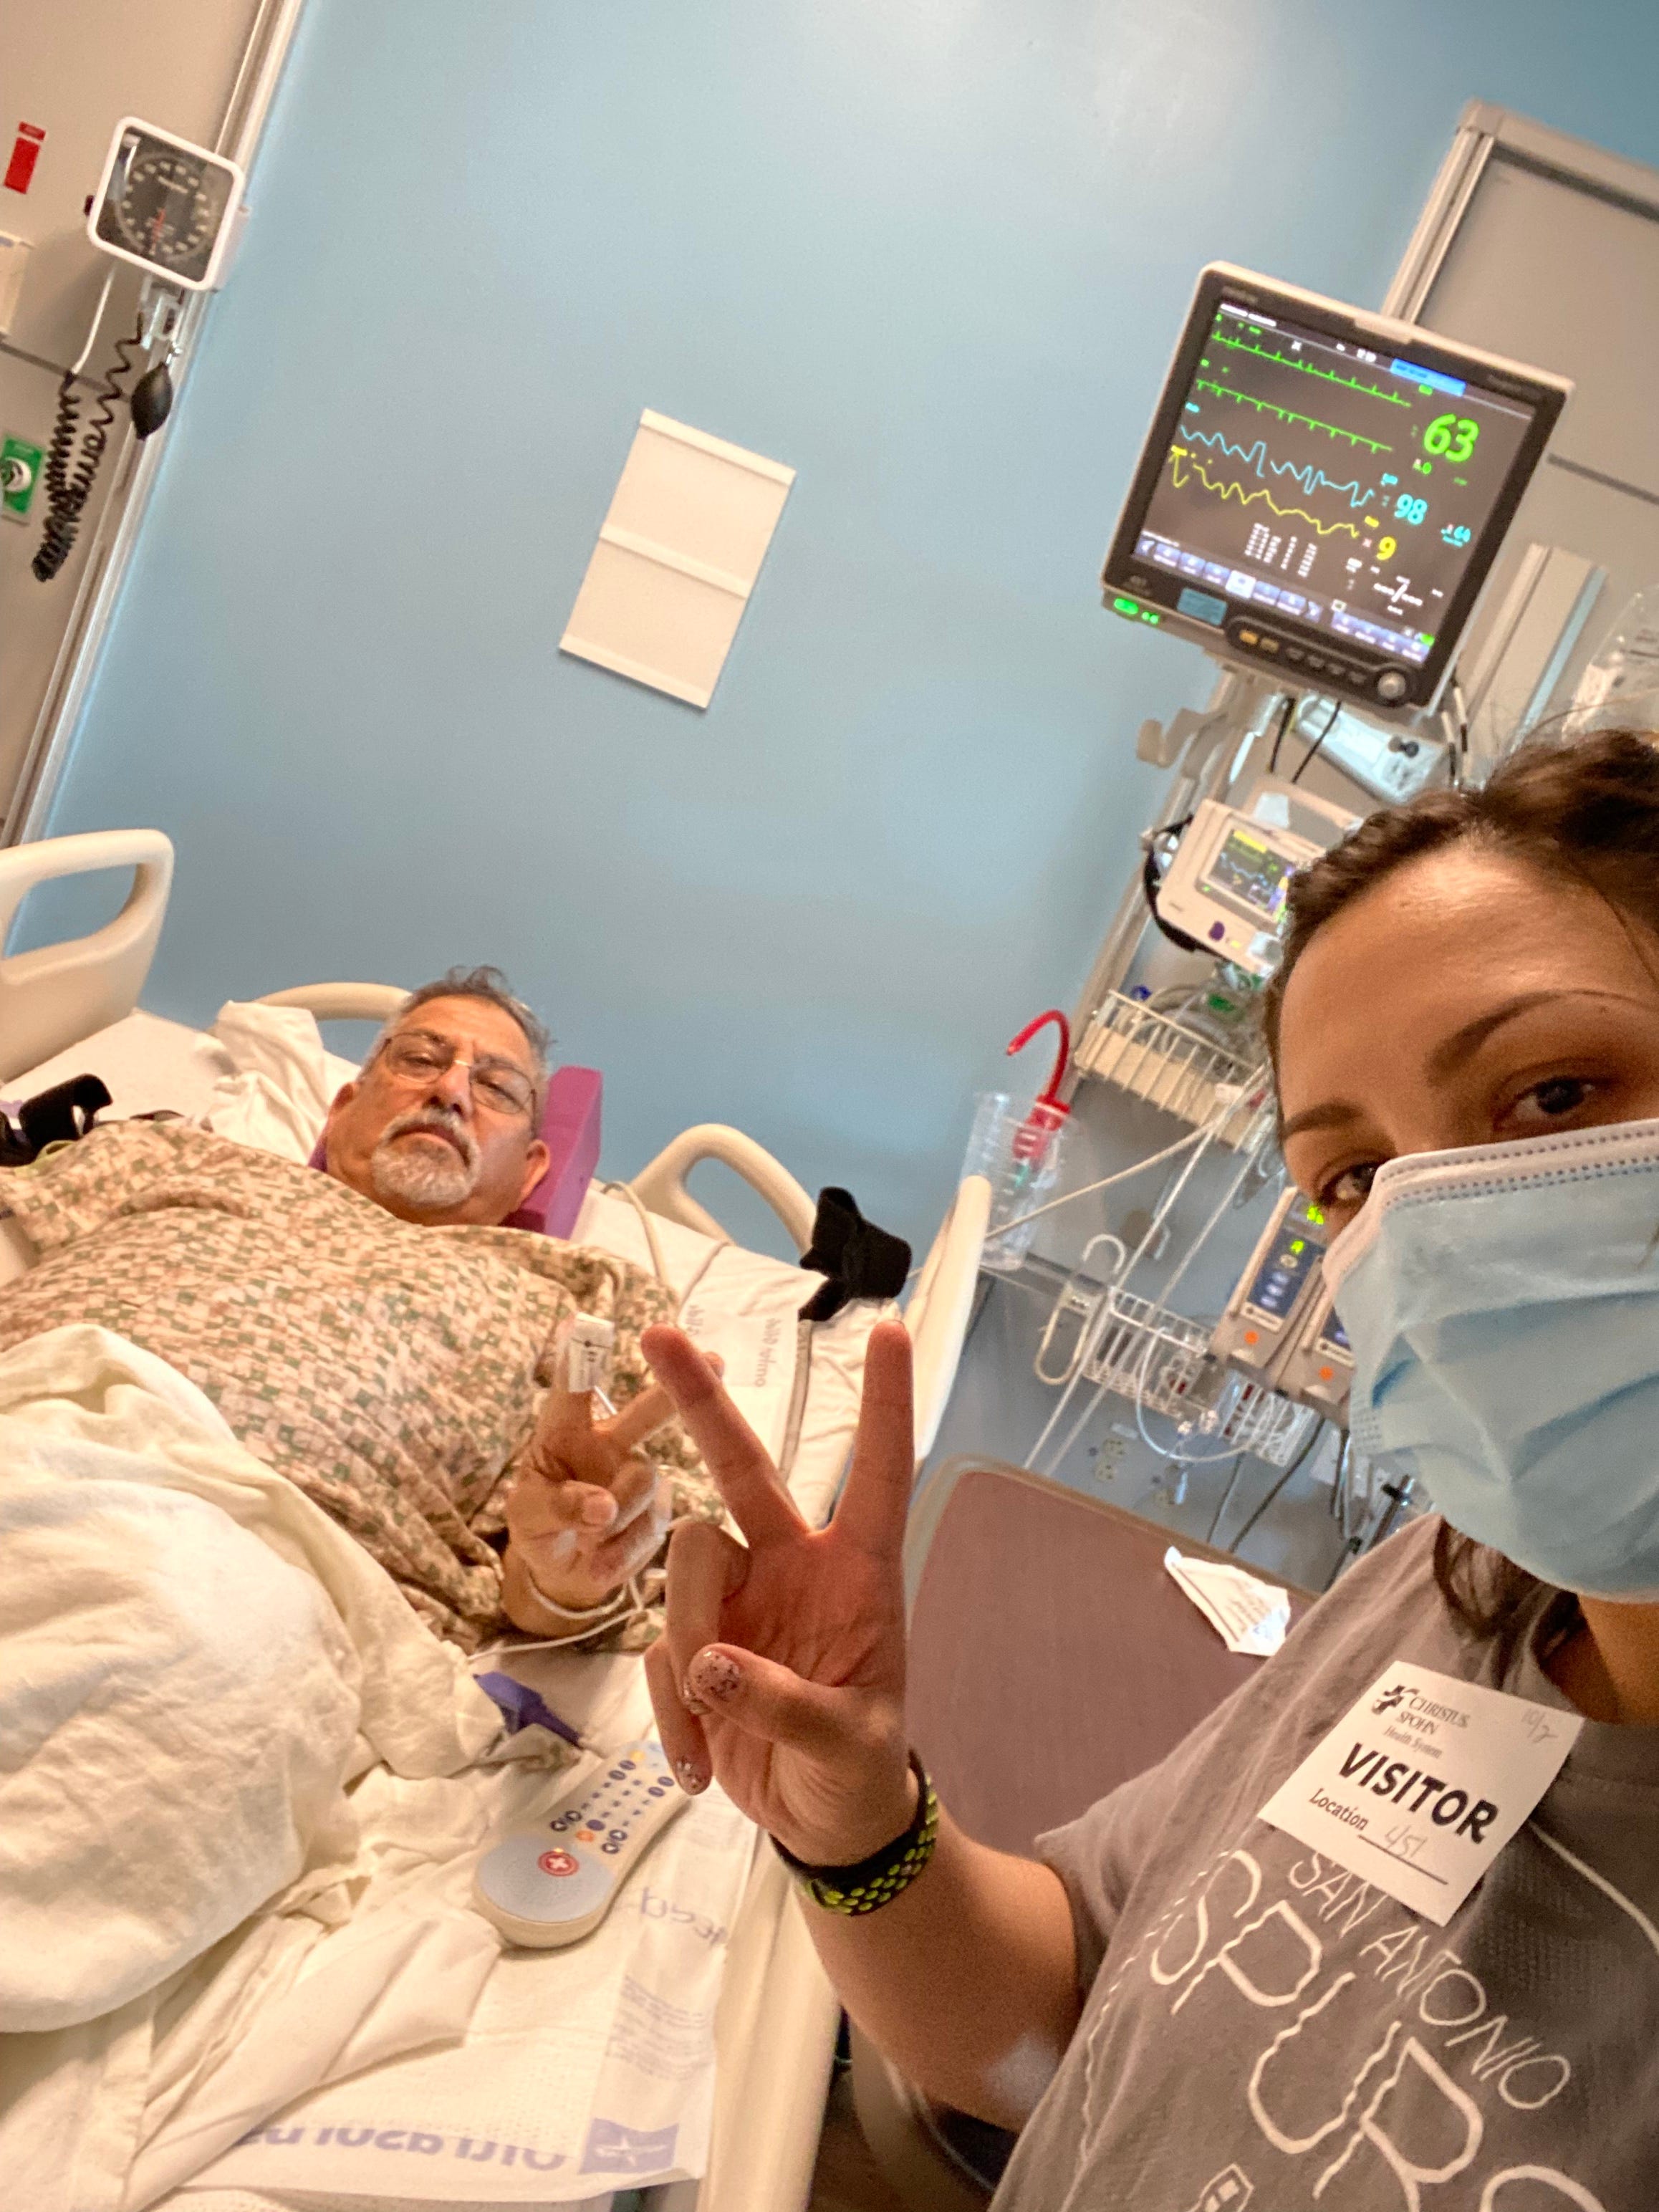 andrea valdez and her dad taking a selfie while he is in his hospital bed recovering from a heart attack